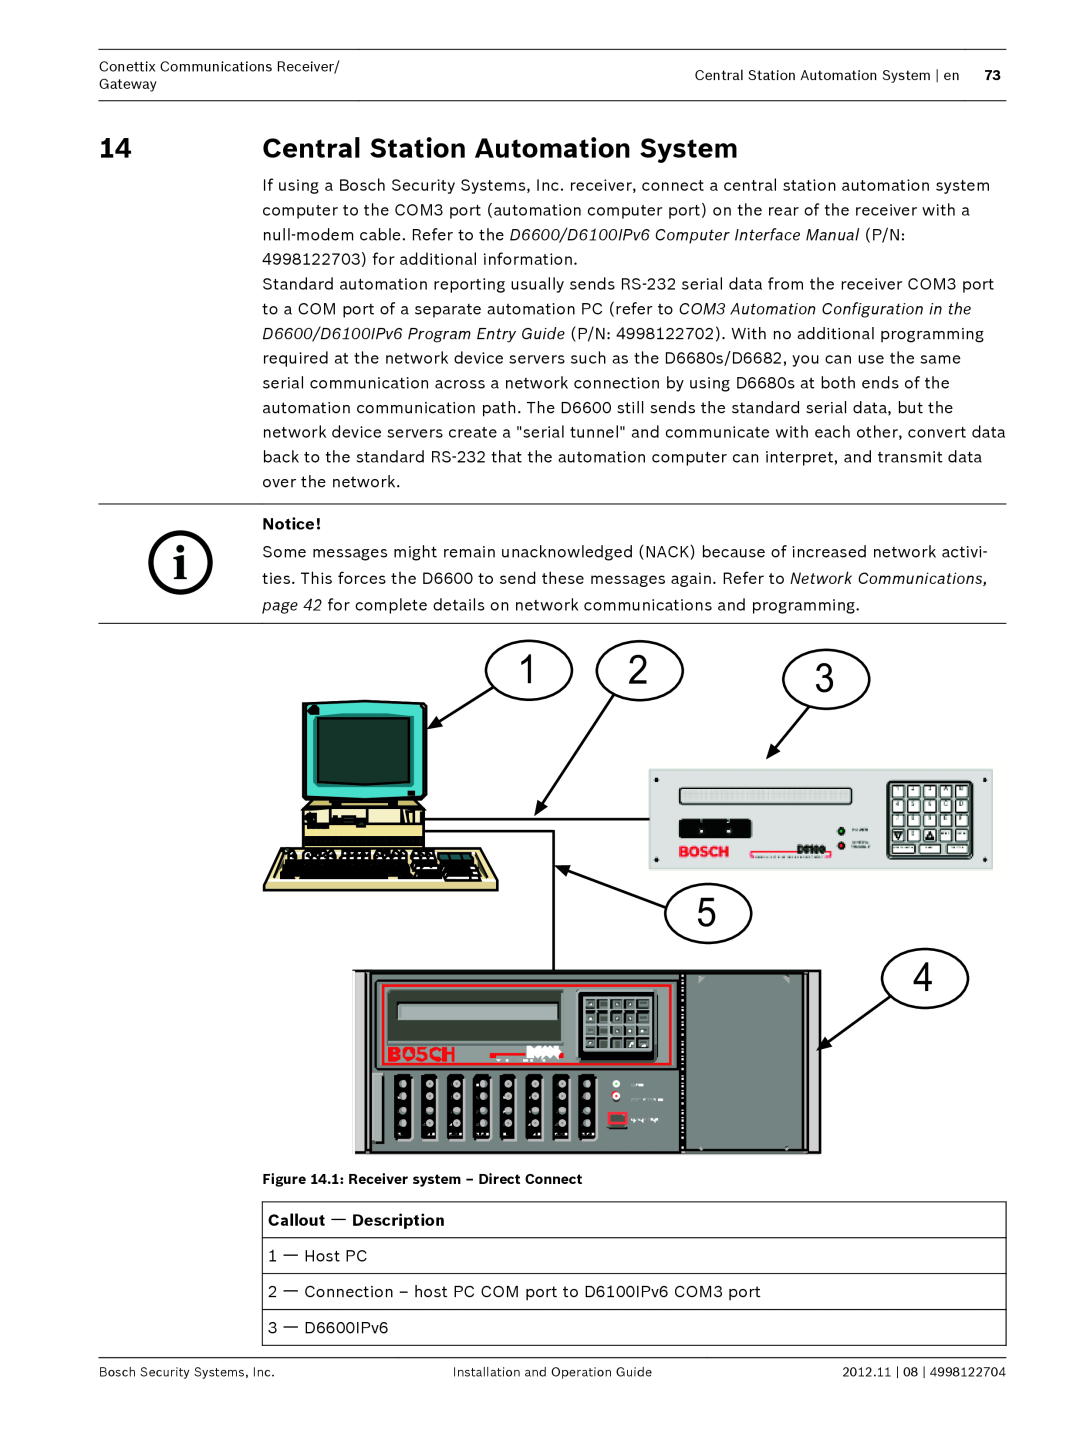 Bosch Appliances D6600 installation and operation guide Central Station Automation System, Callout ᅳ Description 